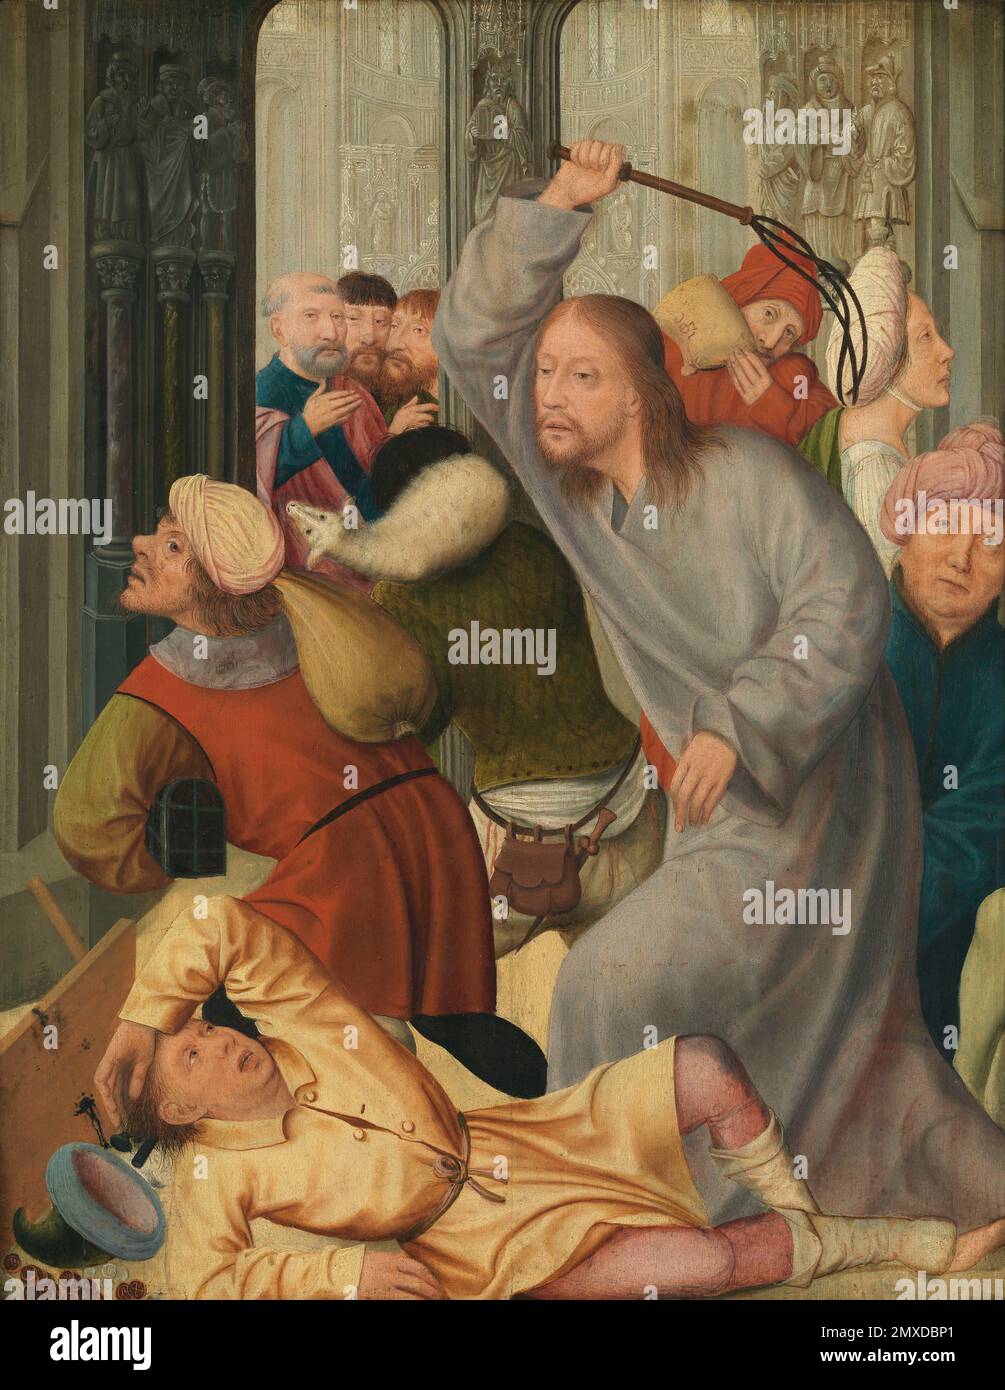 Christ Driving the Money Changers from the Temple. Museum: Royal Museum of Fine Arts, Antwerp. Author: QUENTIN MASSYS. Stock Photo